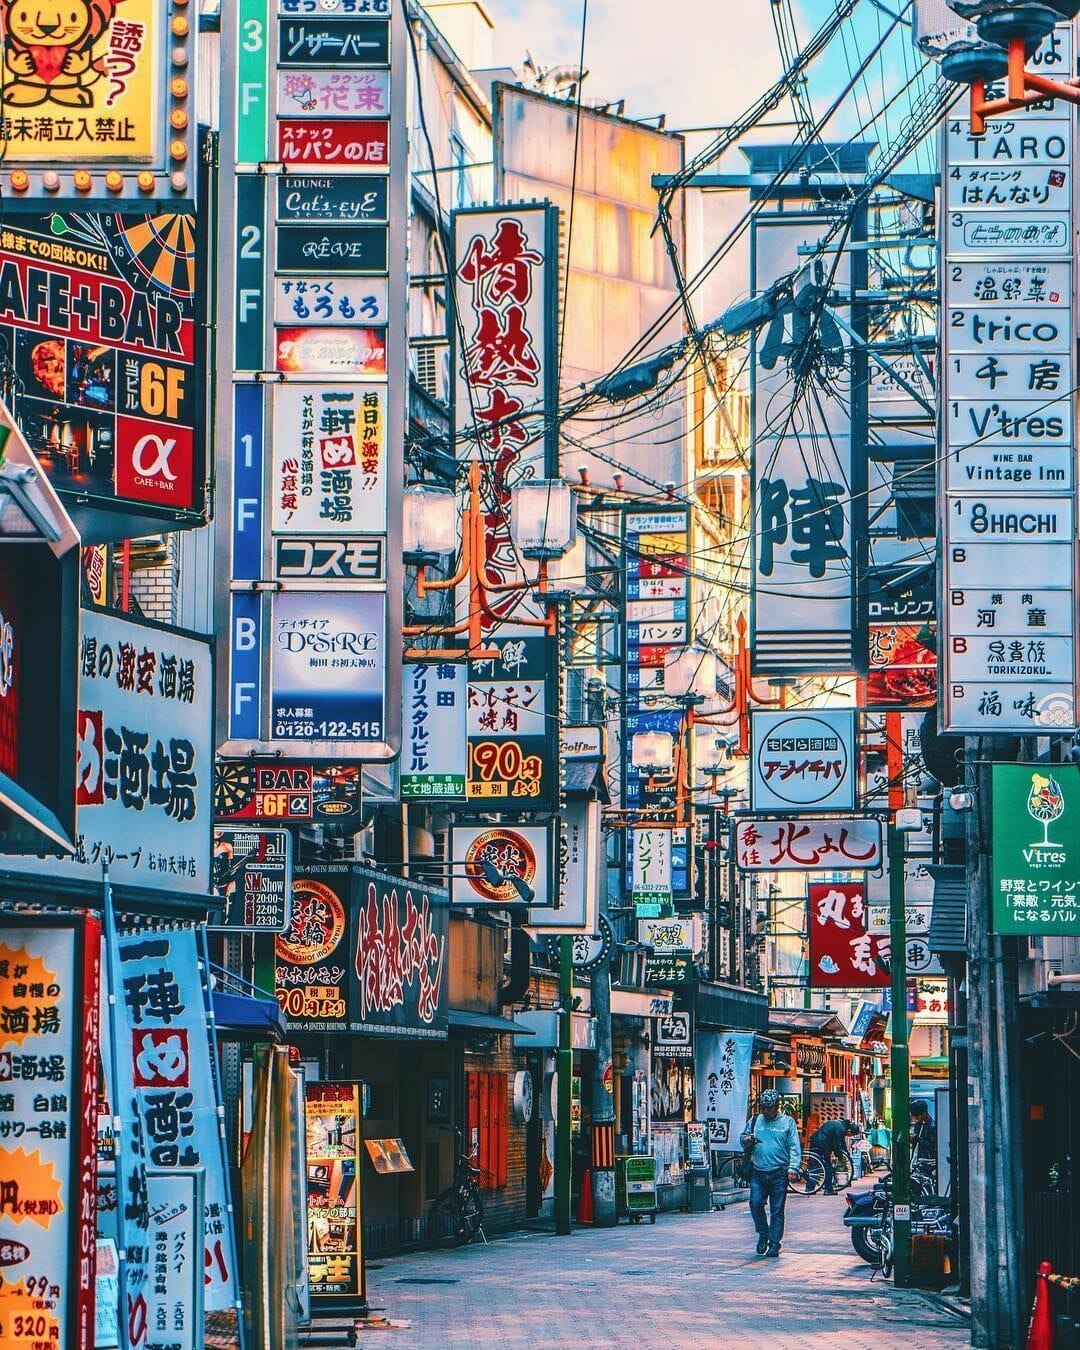 A busy street in Japan with many signs in the background. - Japan